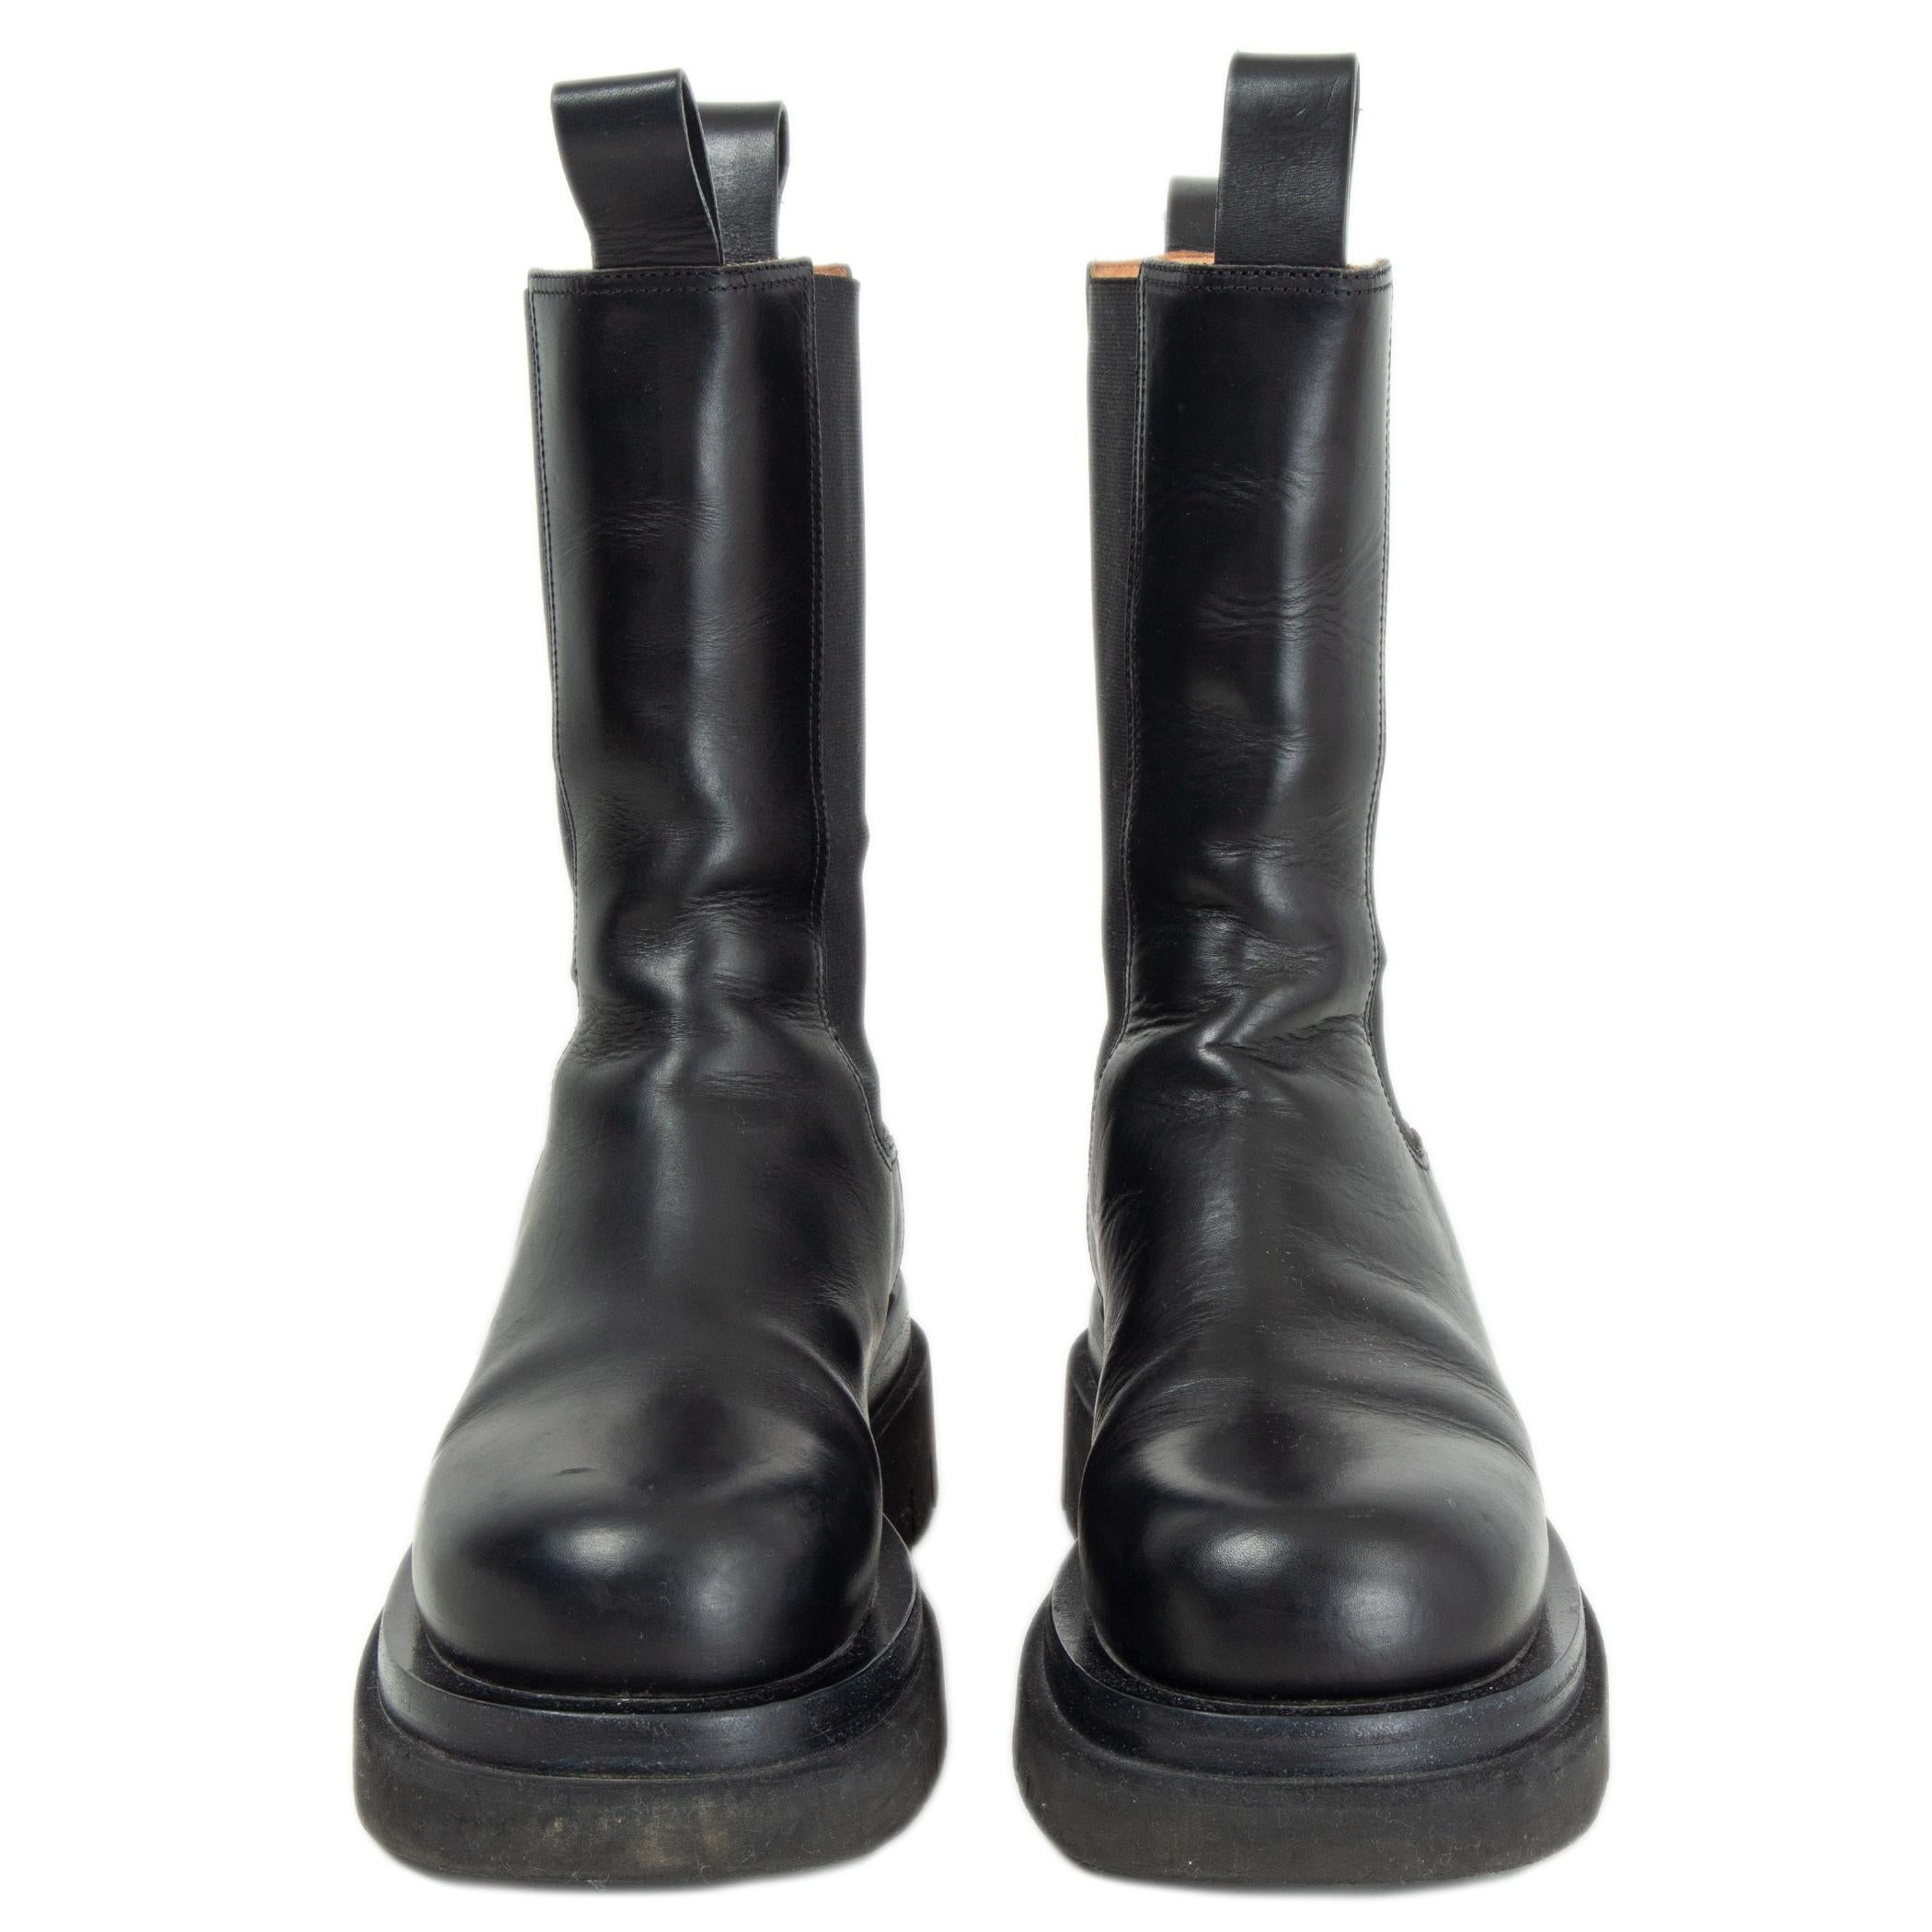 100% authentic Bottega Veneta Lug mid-calf boots in black calfskin uppers set on lugged rubber soles. Elasticated side panels with tonal pull tabs. Have been worn and are in excellent condition. Come with dust bags. 

Measurements
Imprinted